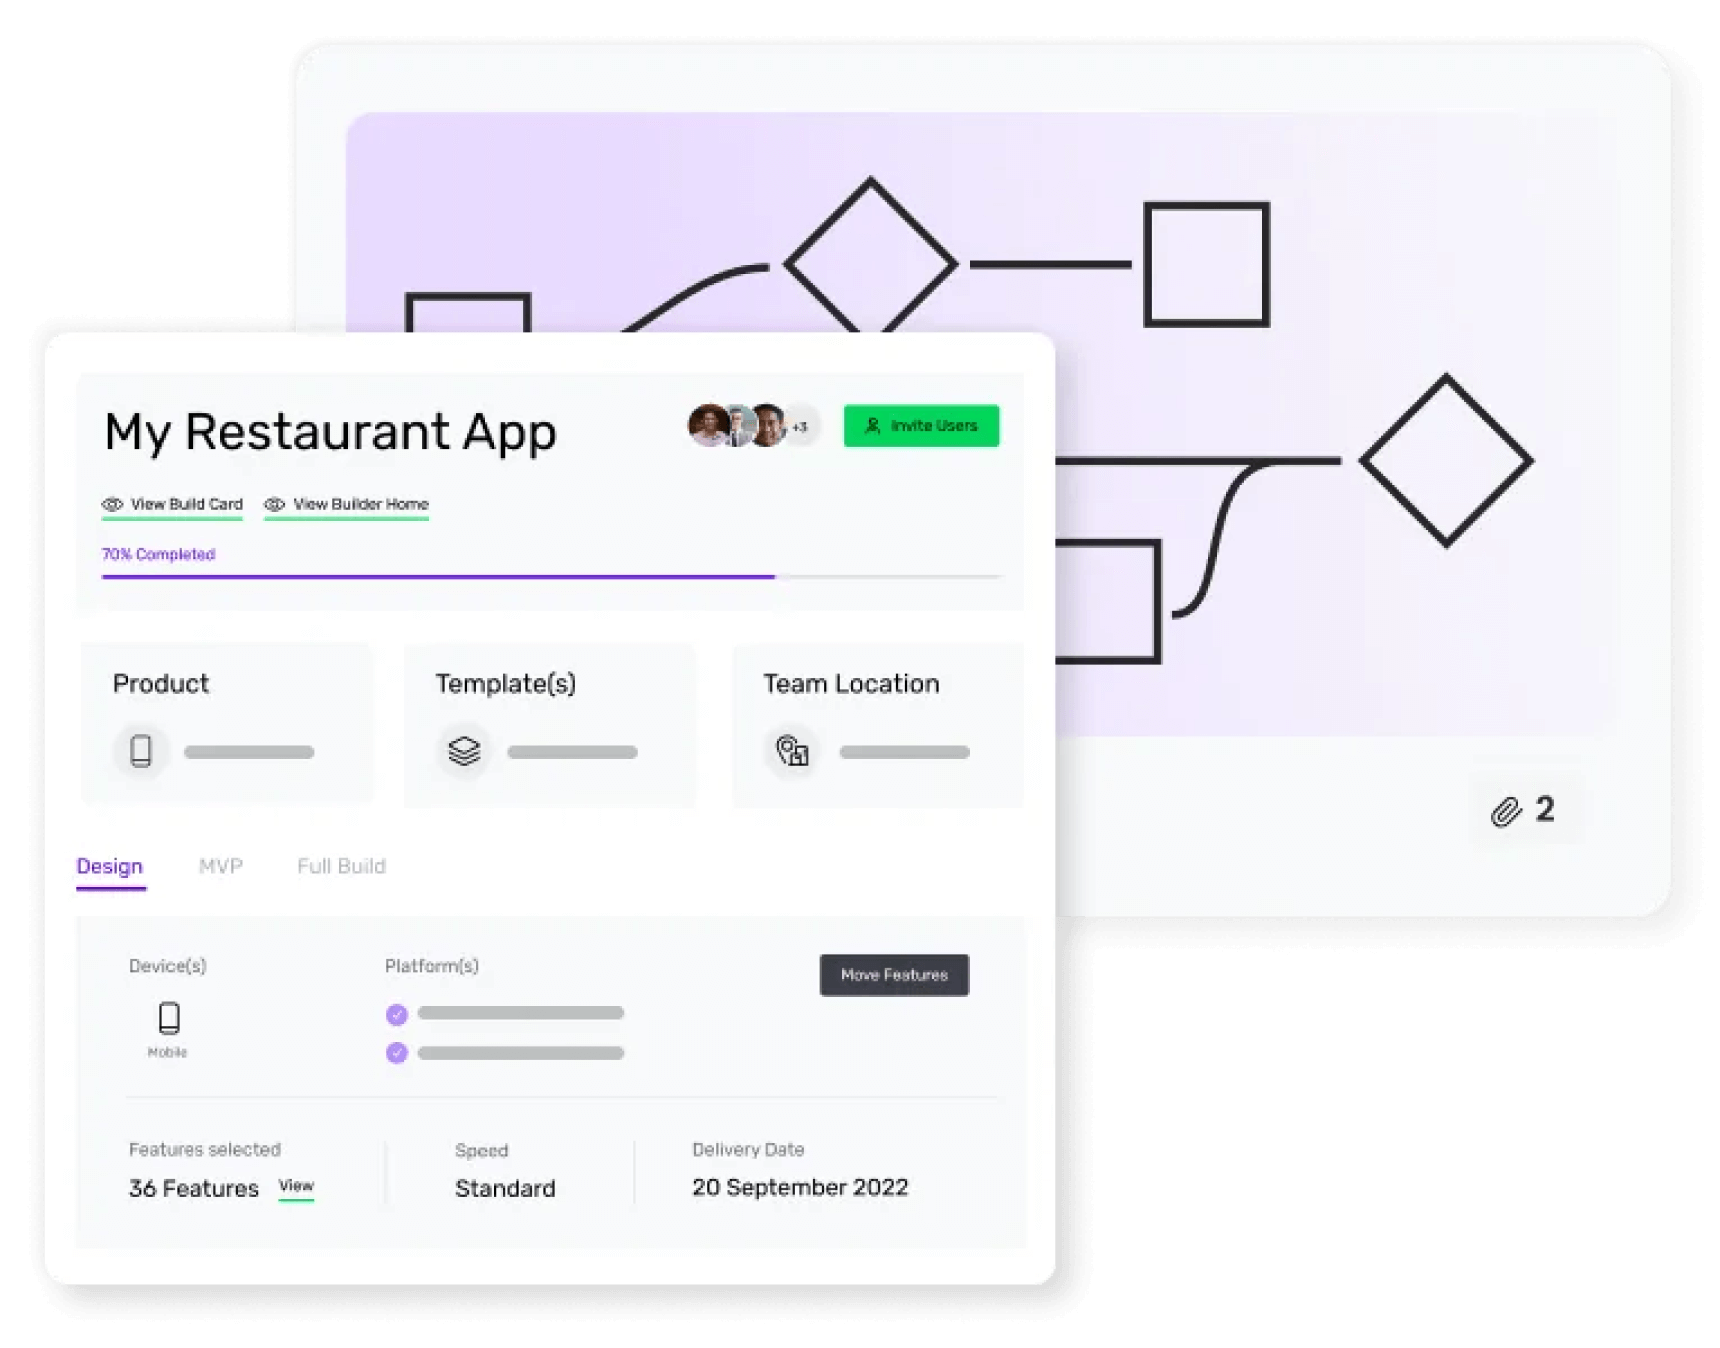 Build card screen for restaurant app with flow chart in background